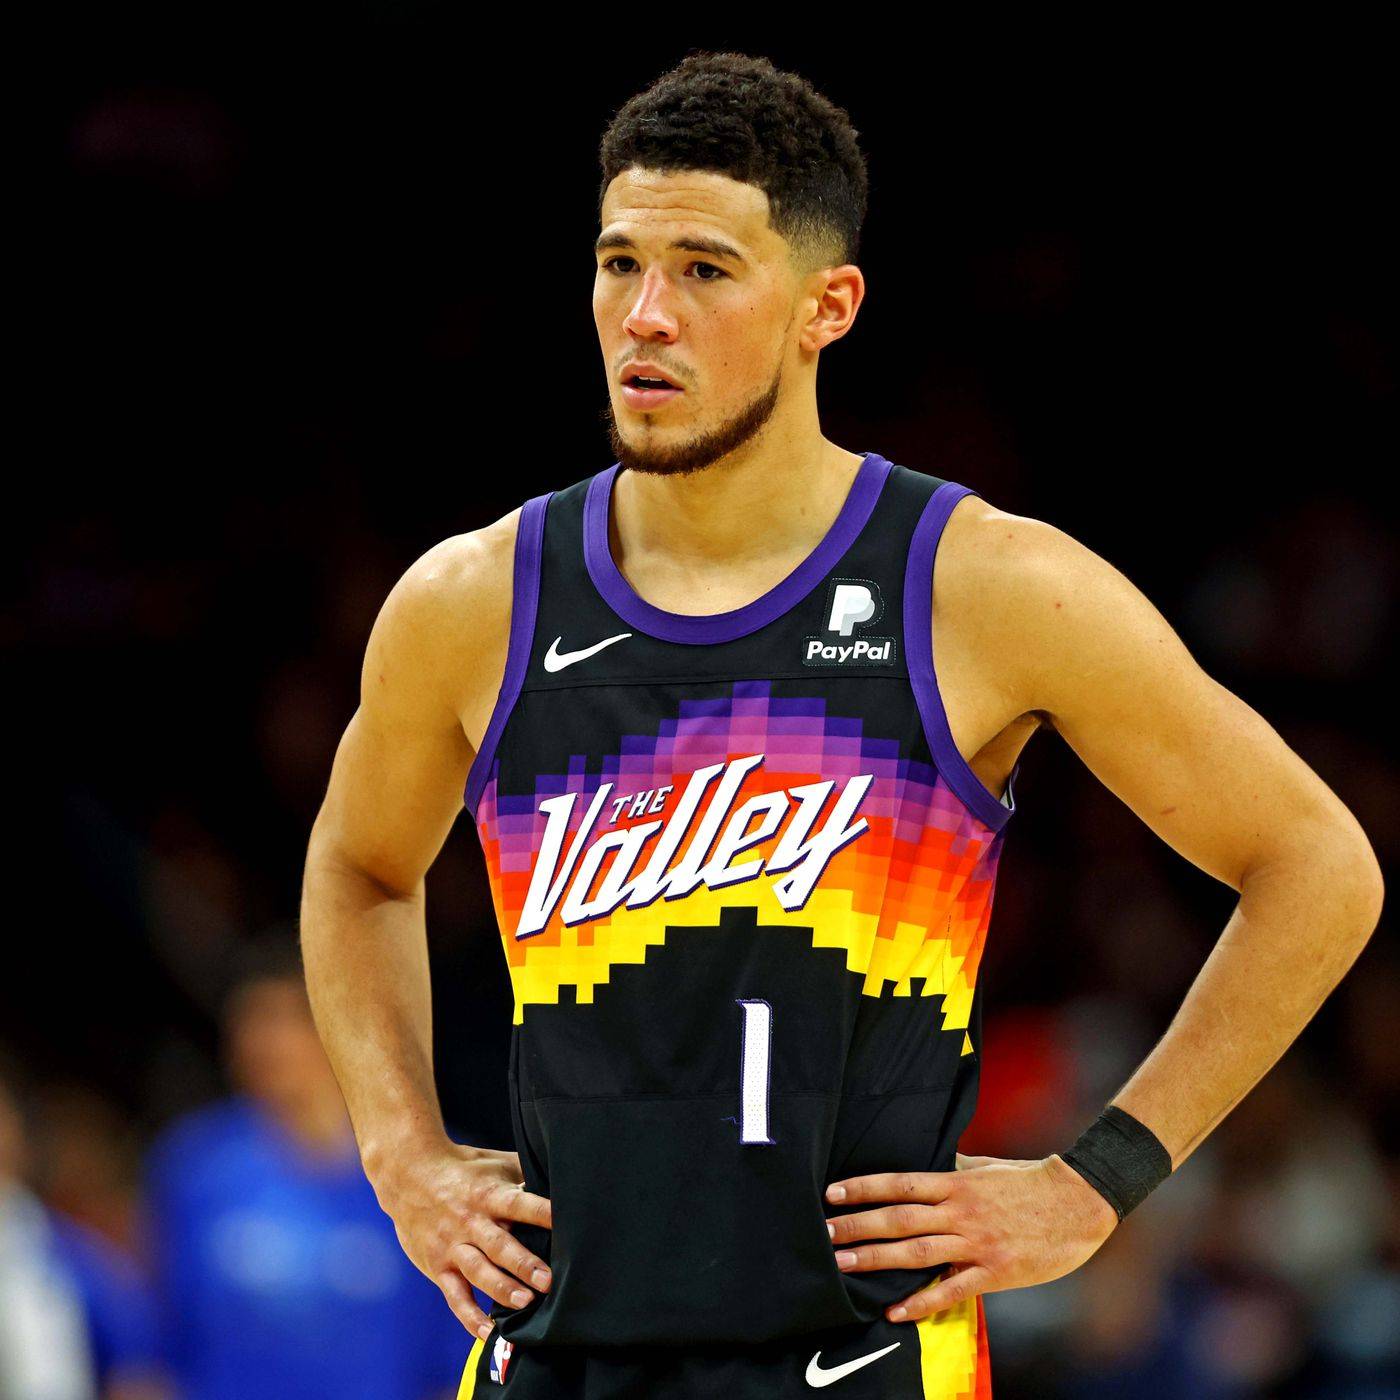 devin booker paypal jersey